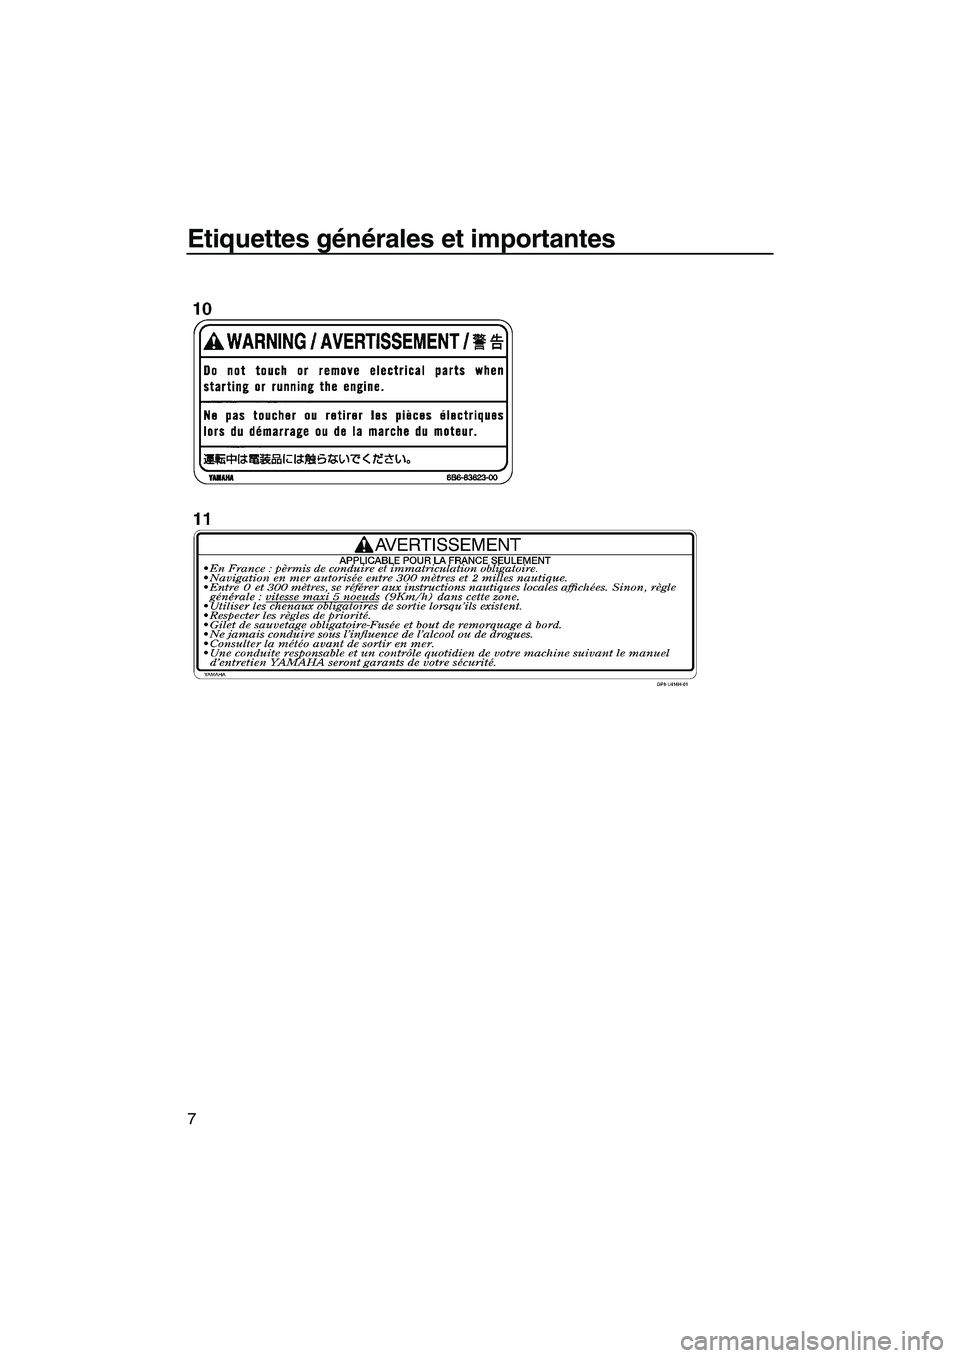 YAMAHA FX HO CRUISER 2007  Notices Demploi (in French) Etiquettes générales et importantes
7
UF1X71F0.book  Page 7  Wednesday, September 27, 2006  1:04 PM 